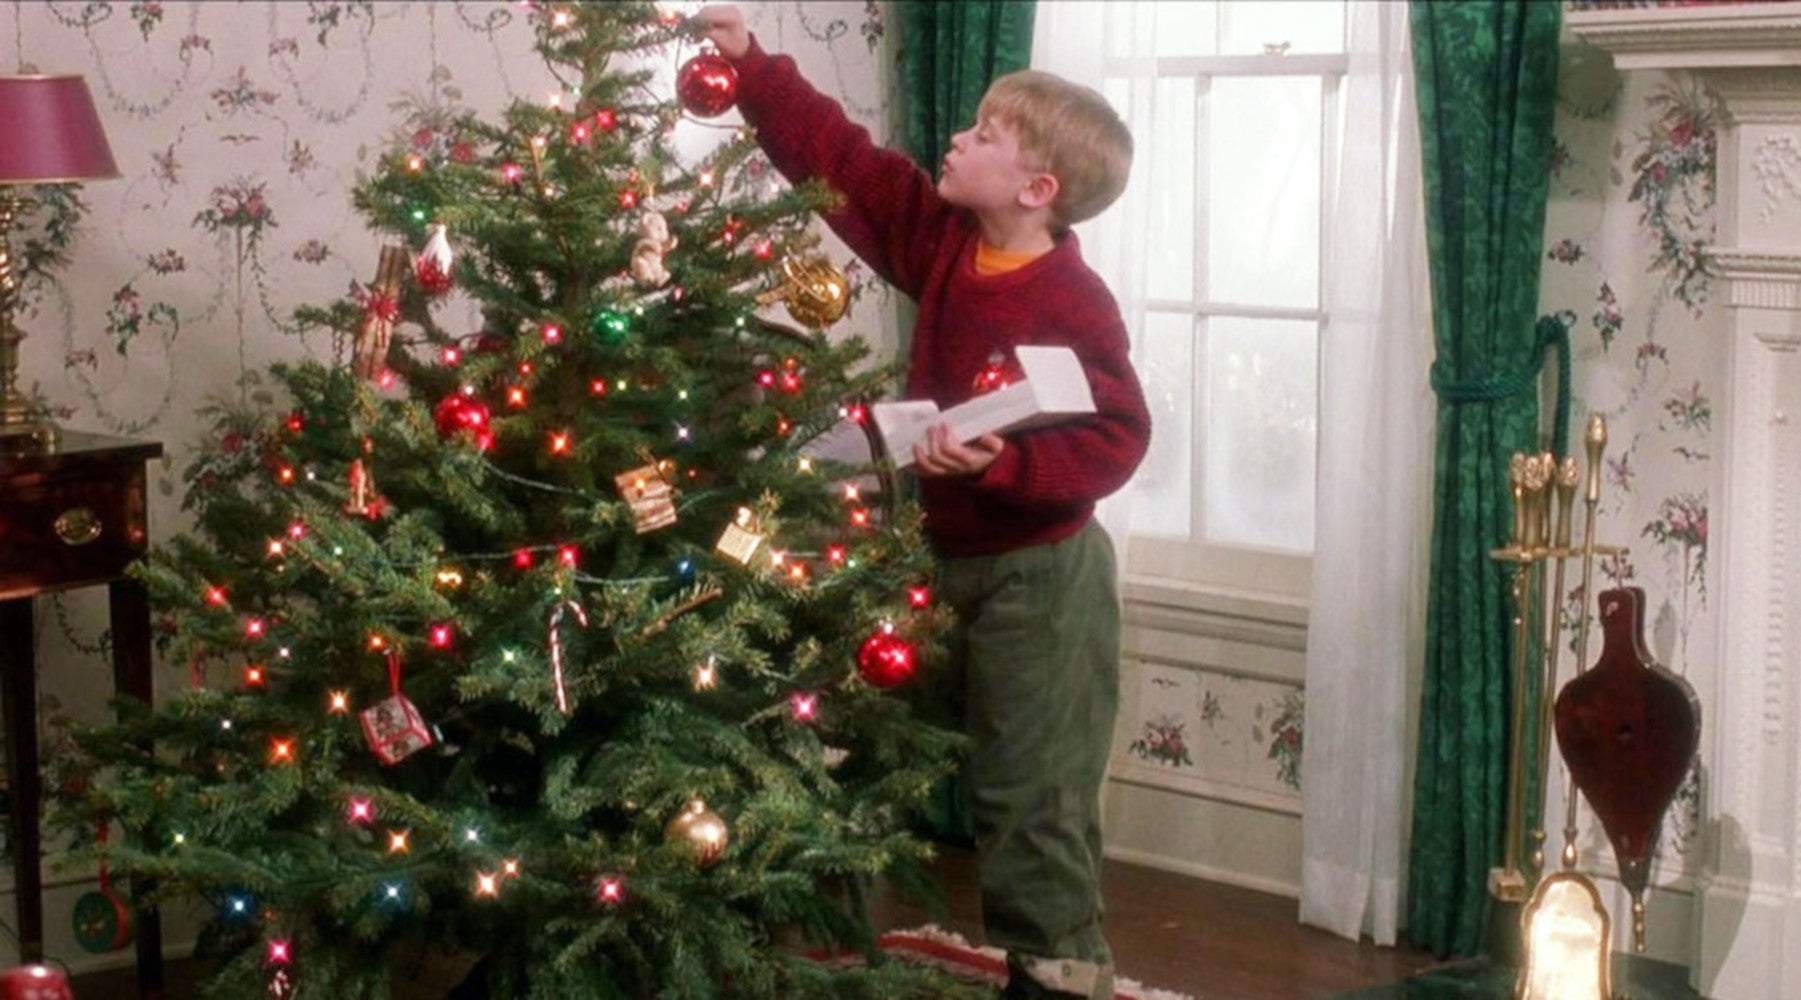 Home Alone number one Christmas movie